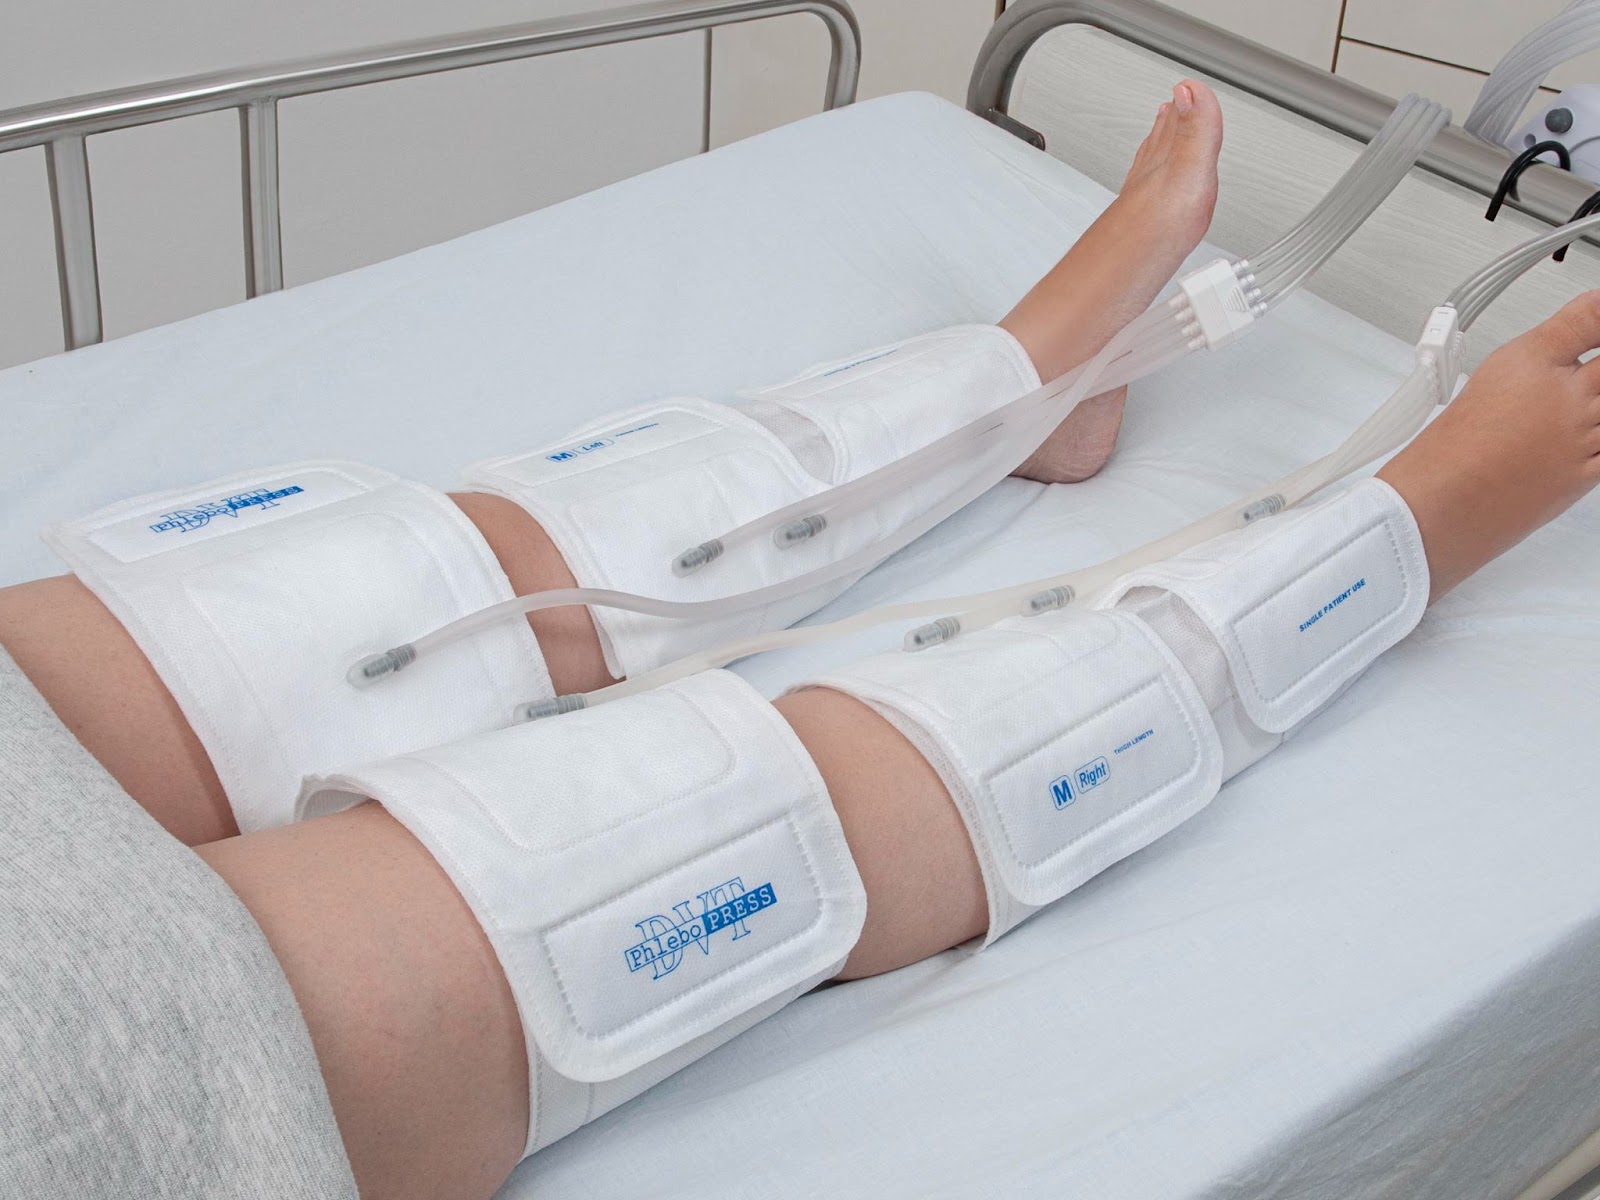 Intermittent Pneumatic Compression to Reduce the Risk of Venous